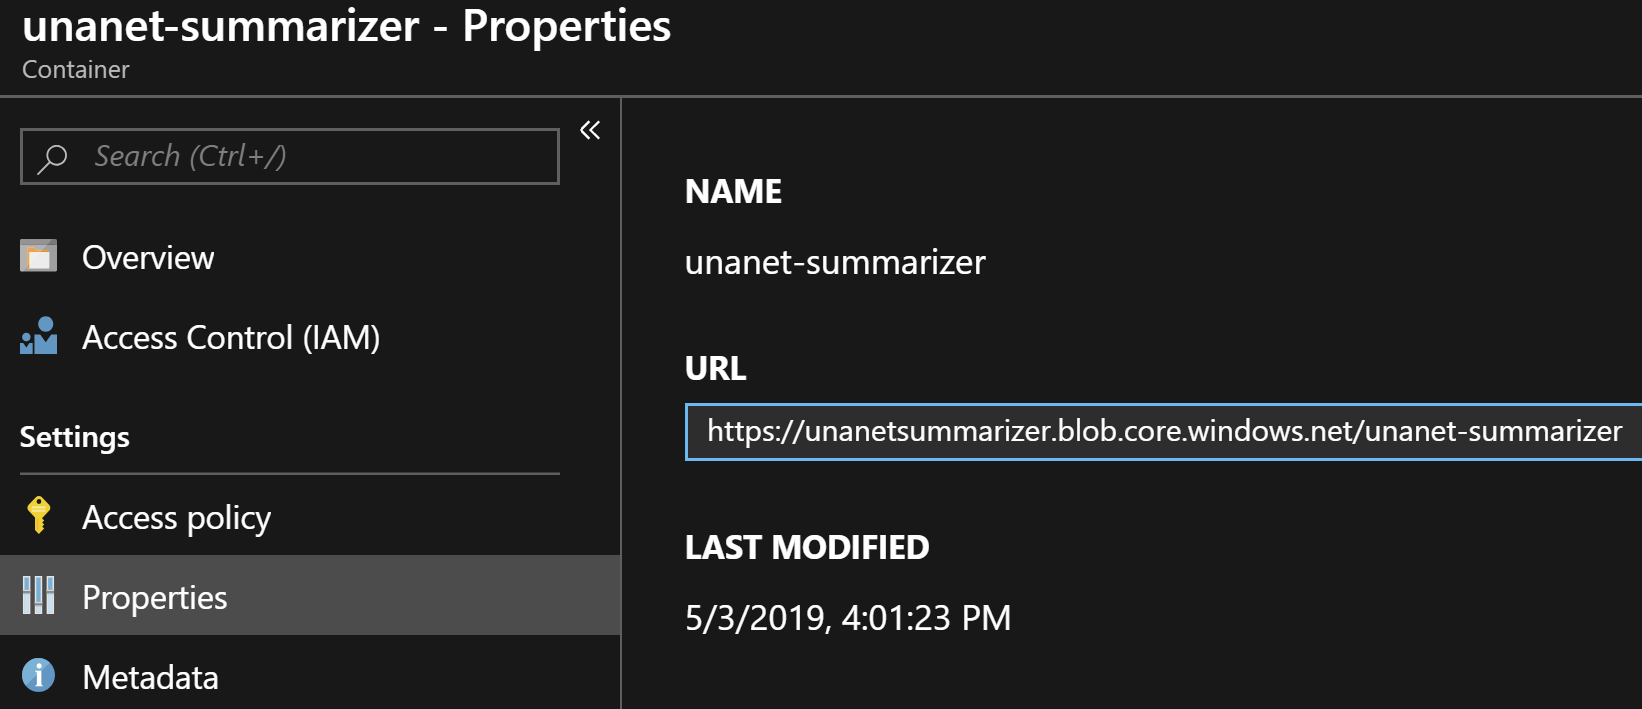 getting the URL for the blob container